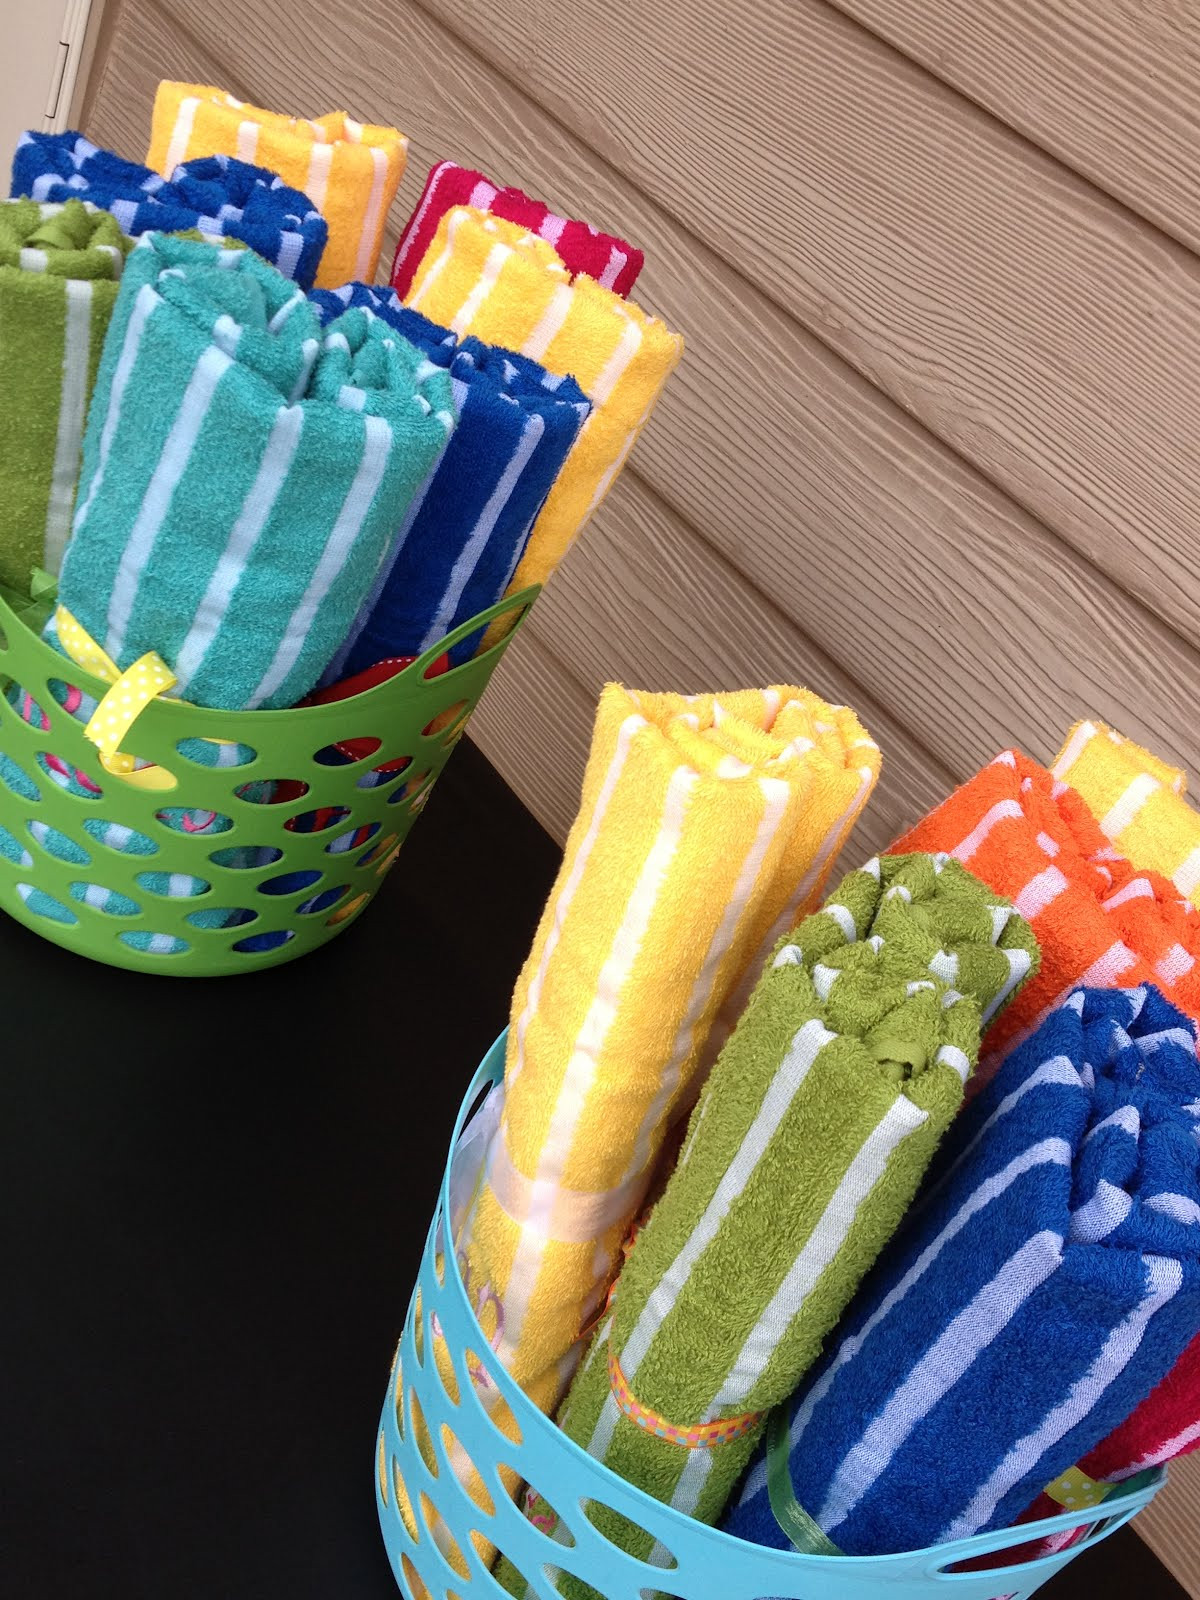 Pool Party Gifts Ideas
 The Buchman Way Reese s Pool Party